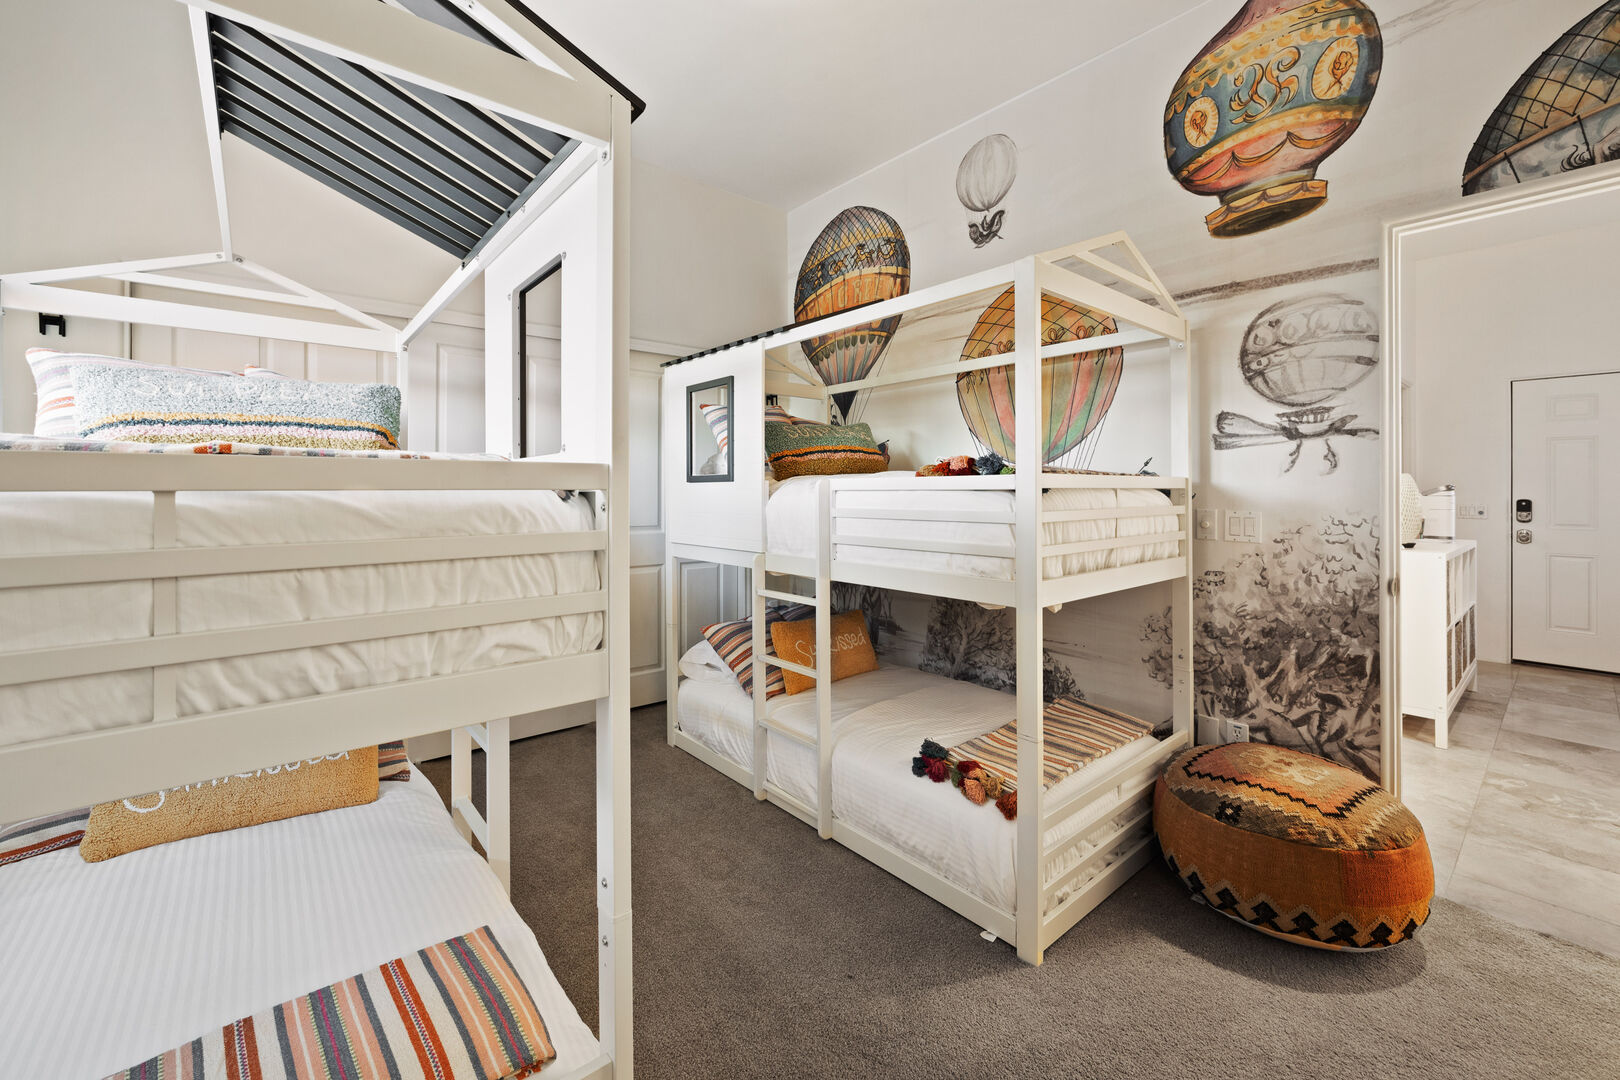 Fly off to dream land in this darling kids bunk room.